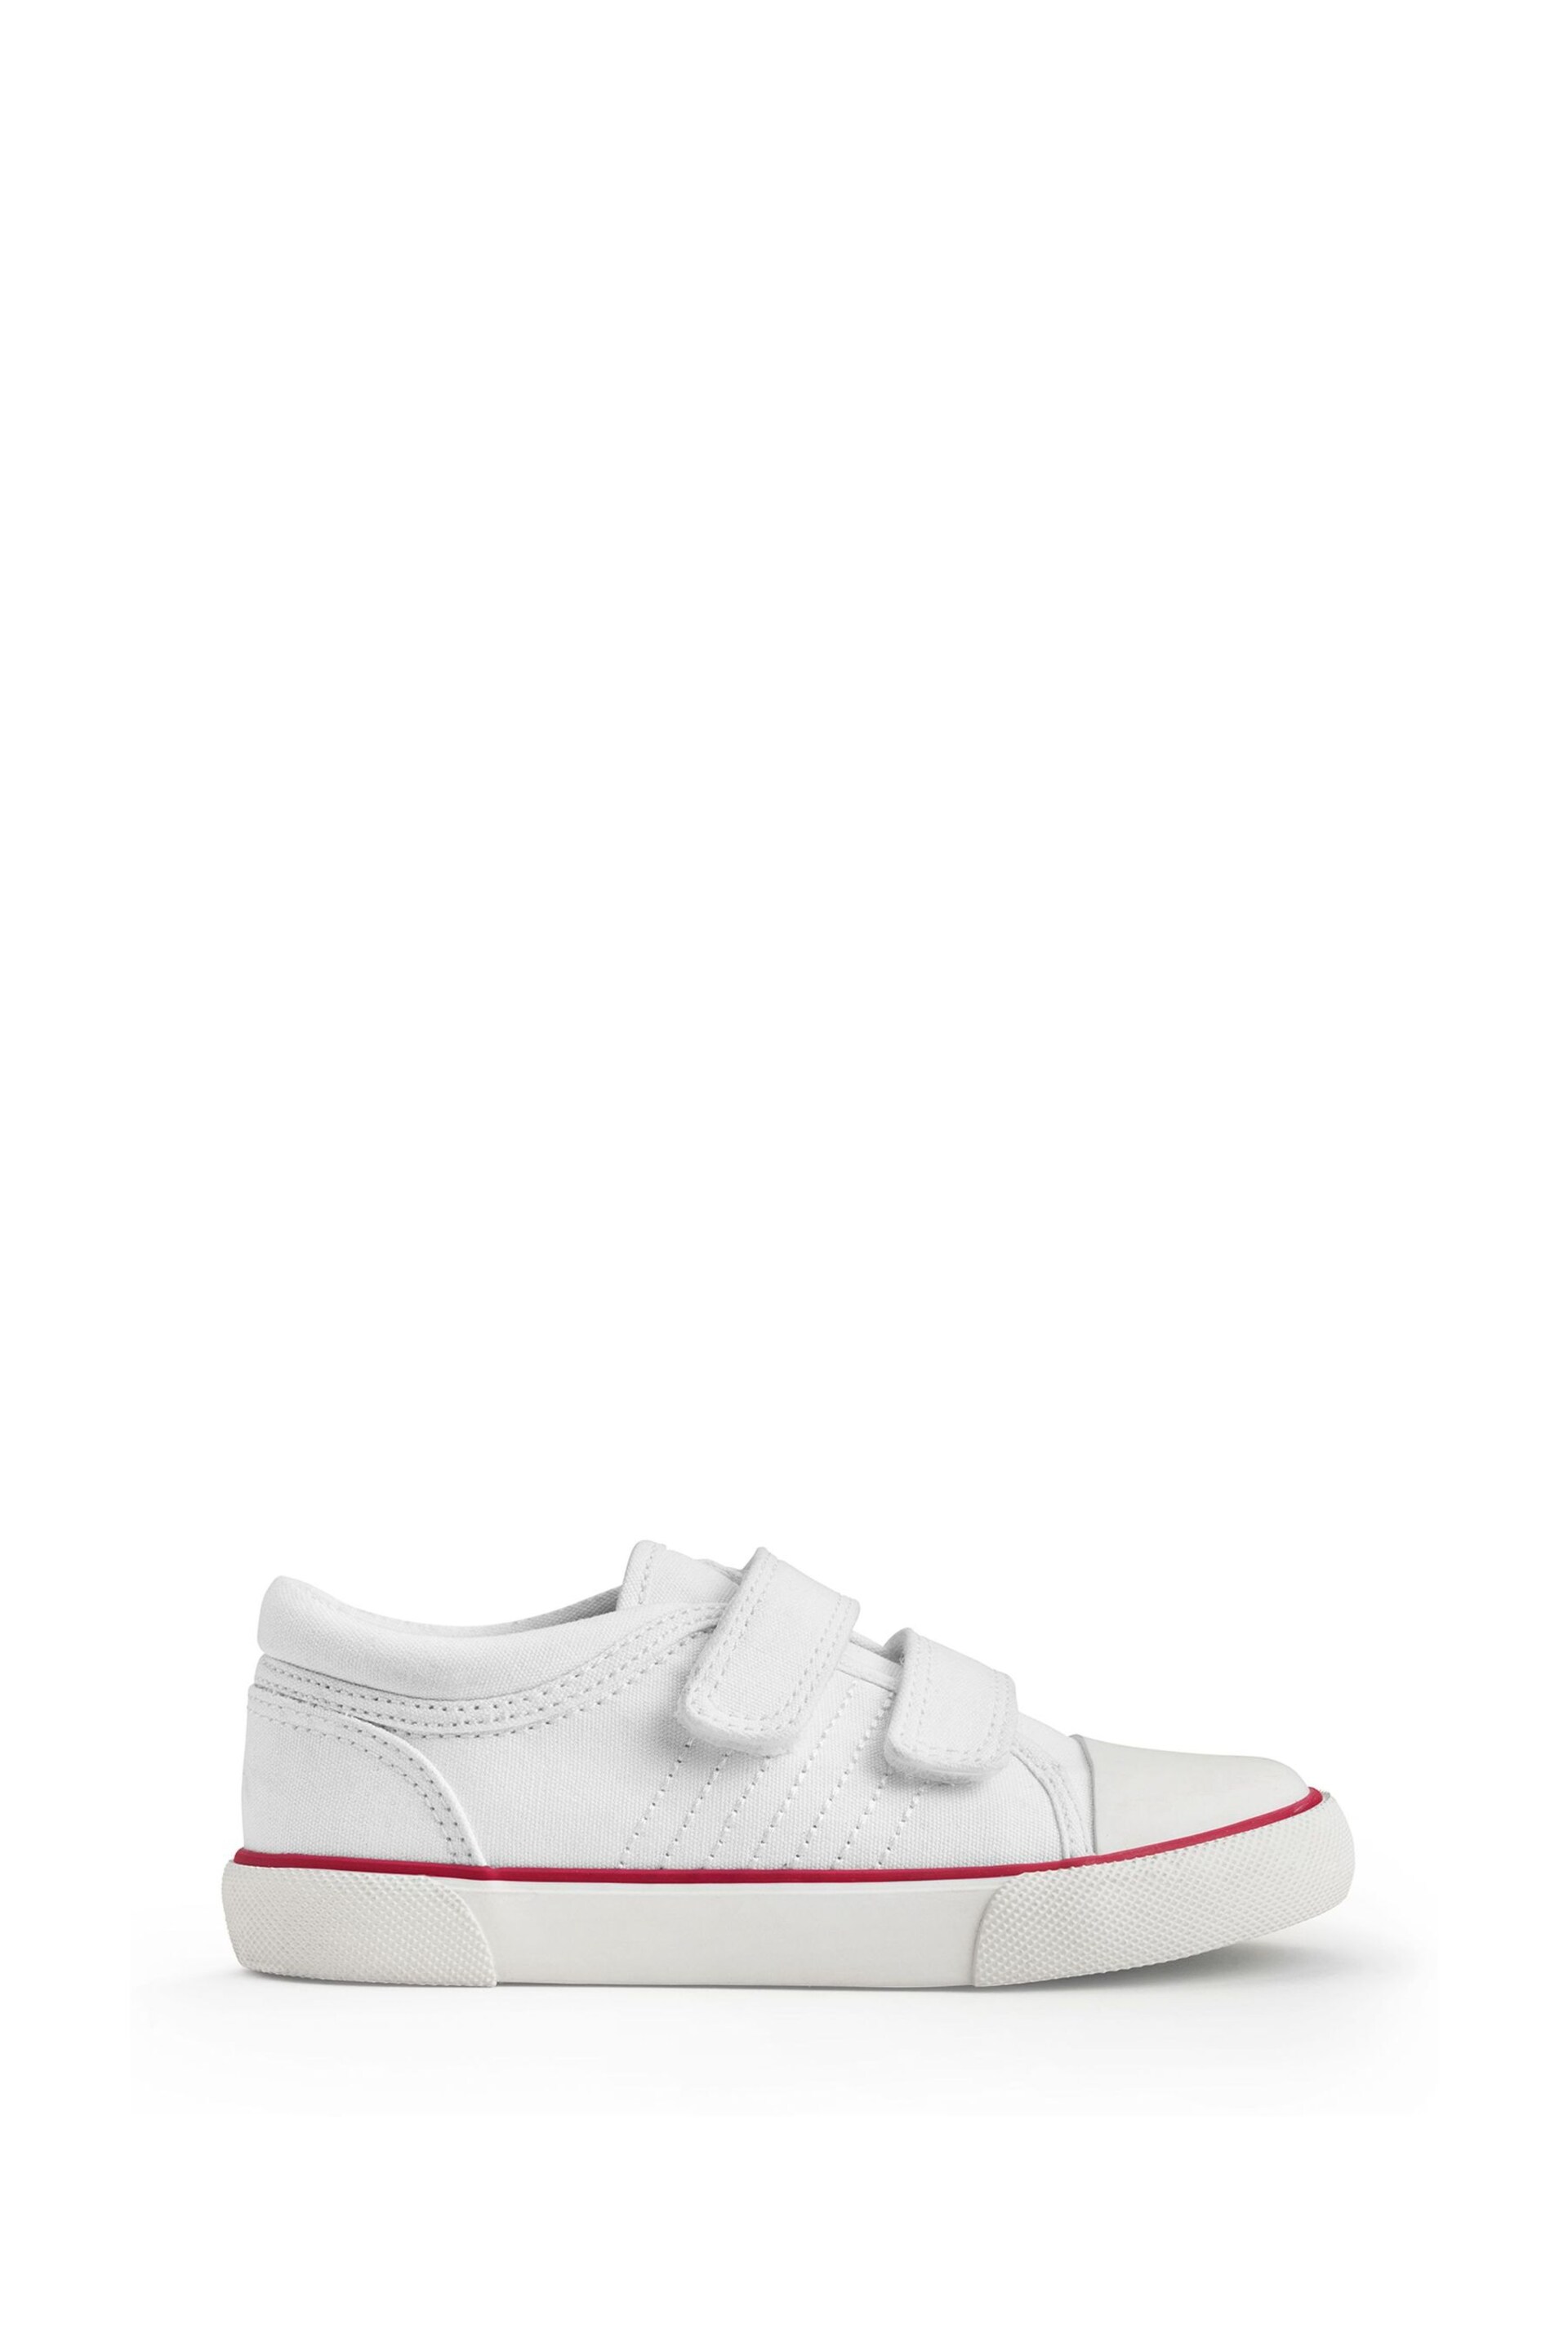 Start-Rite Sandcastle White Canvas Washable White Trainers - Image 2 of 6